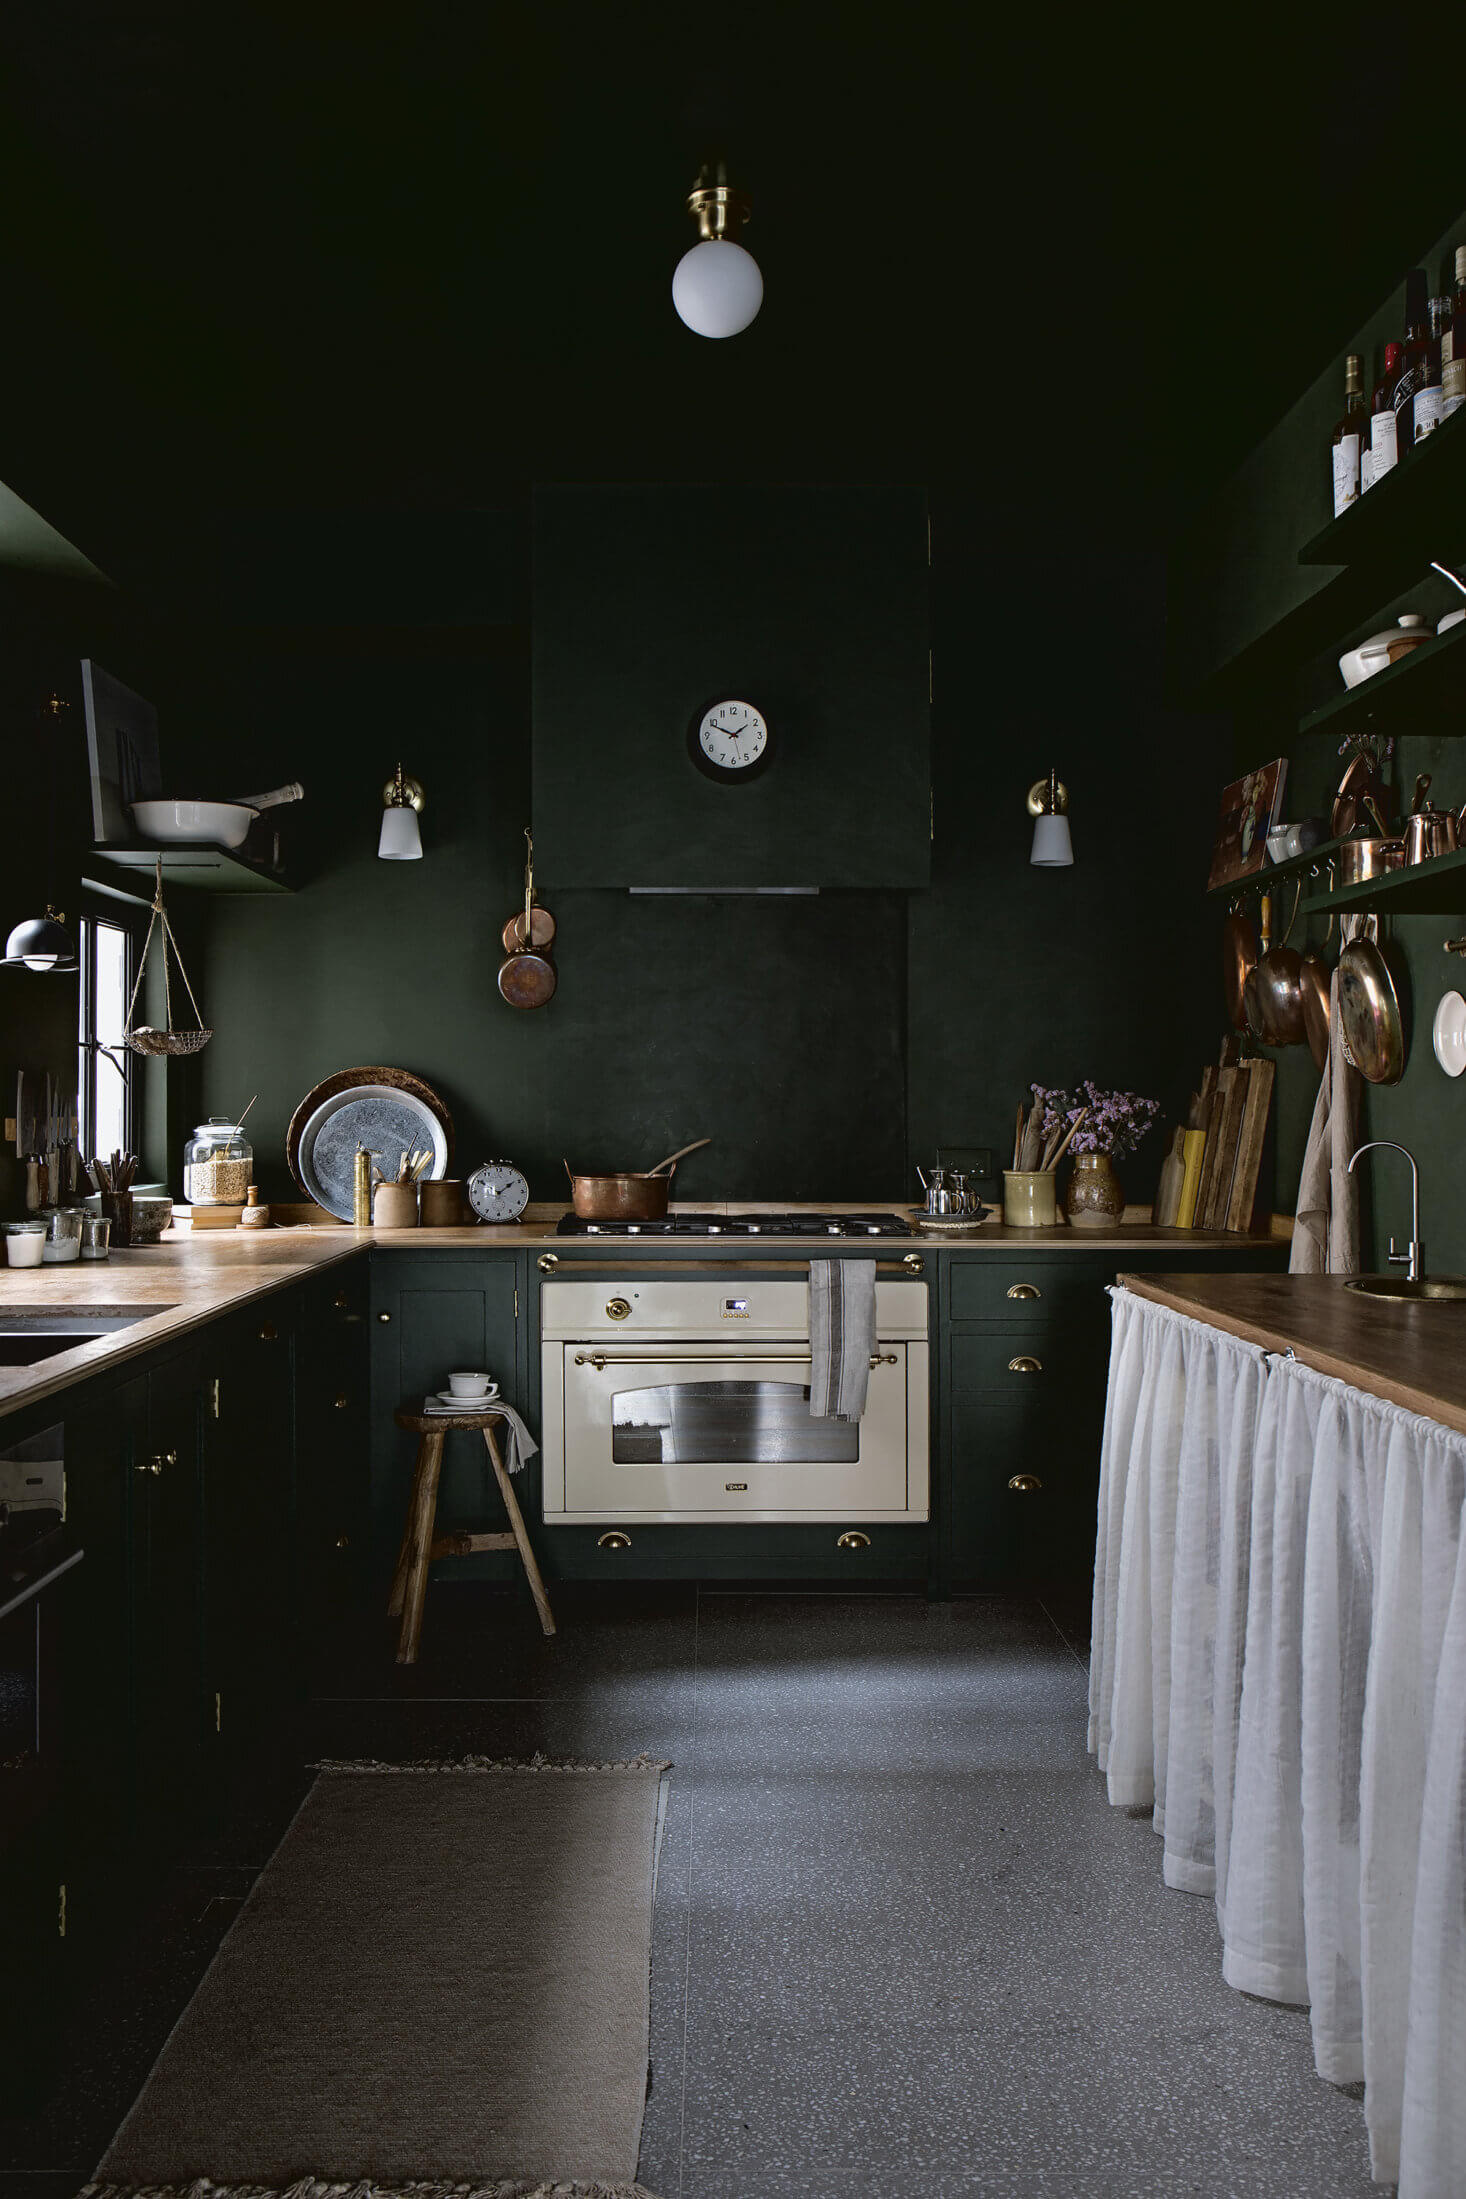 The Green Victorian-Inspired Kitchen of Lady and Pups Founder Mandy Lee